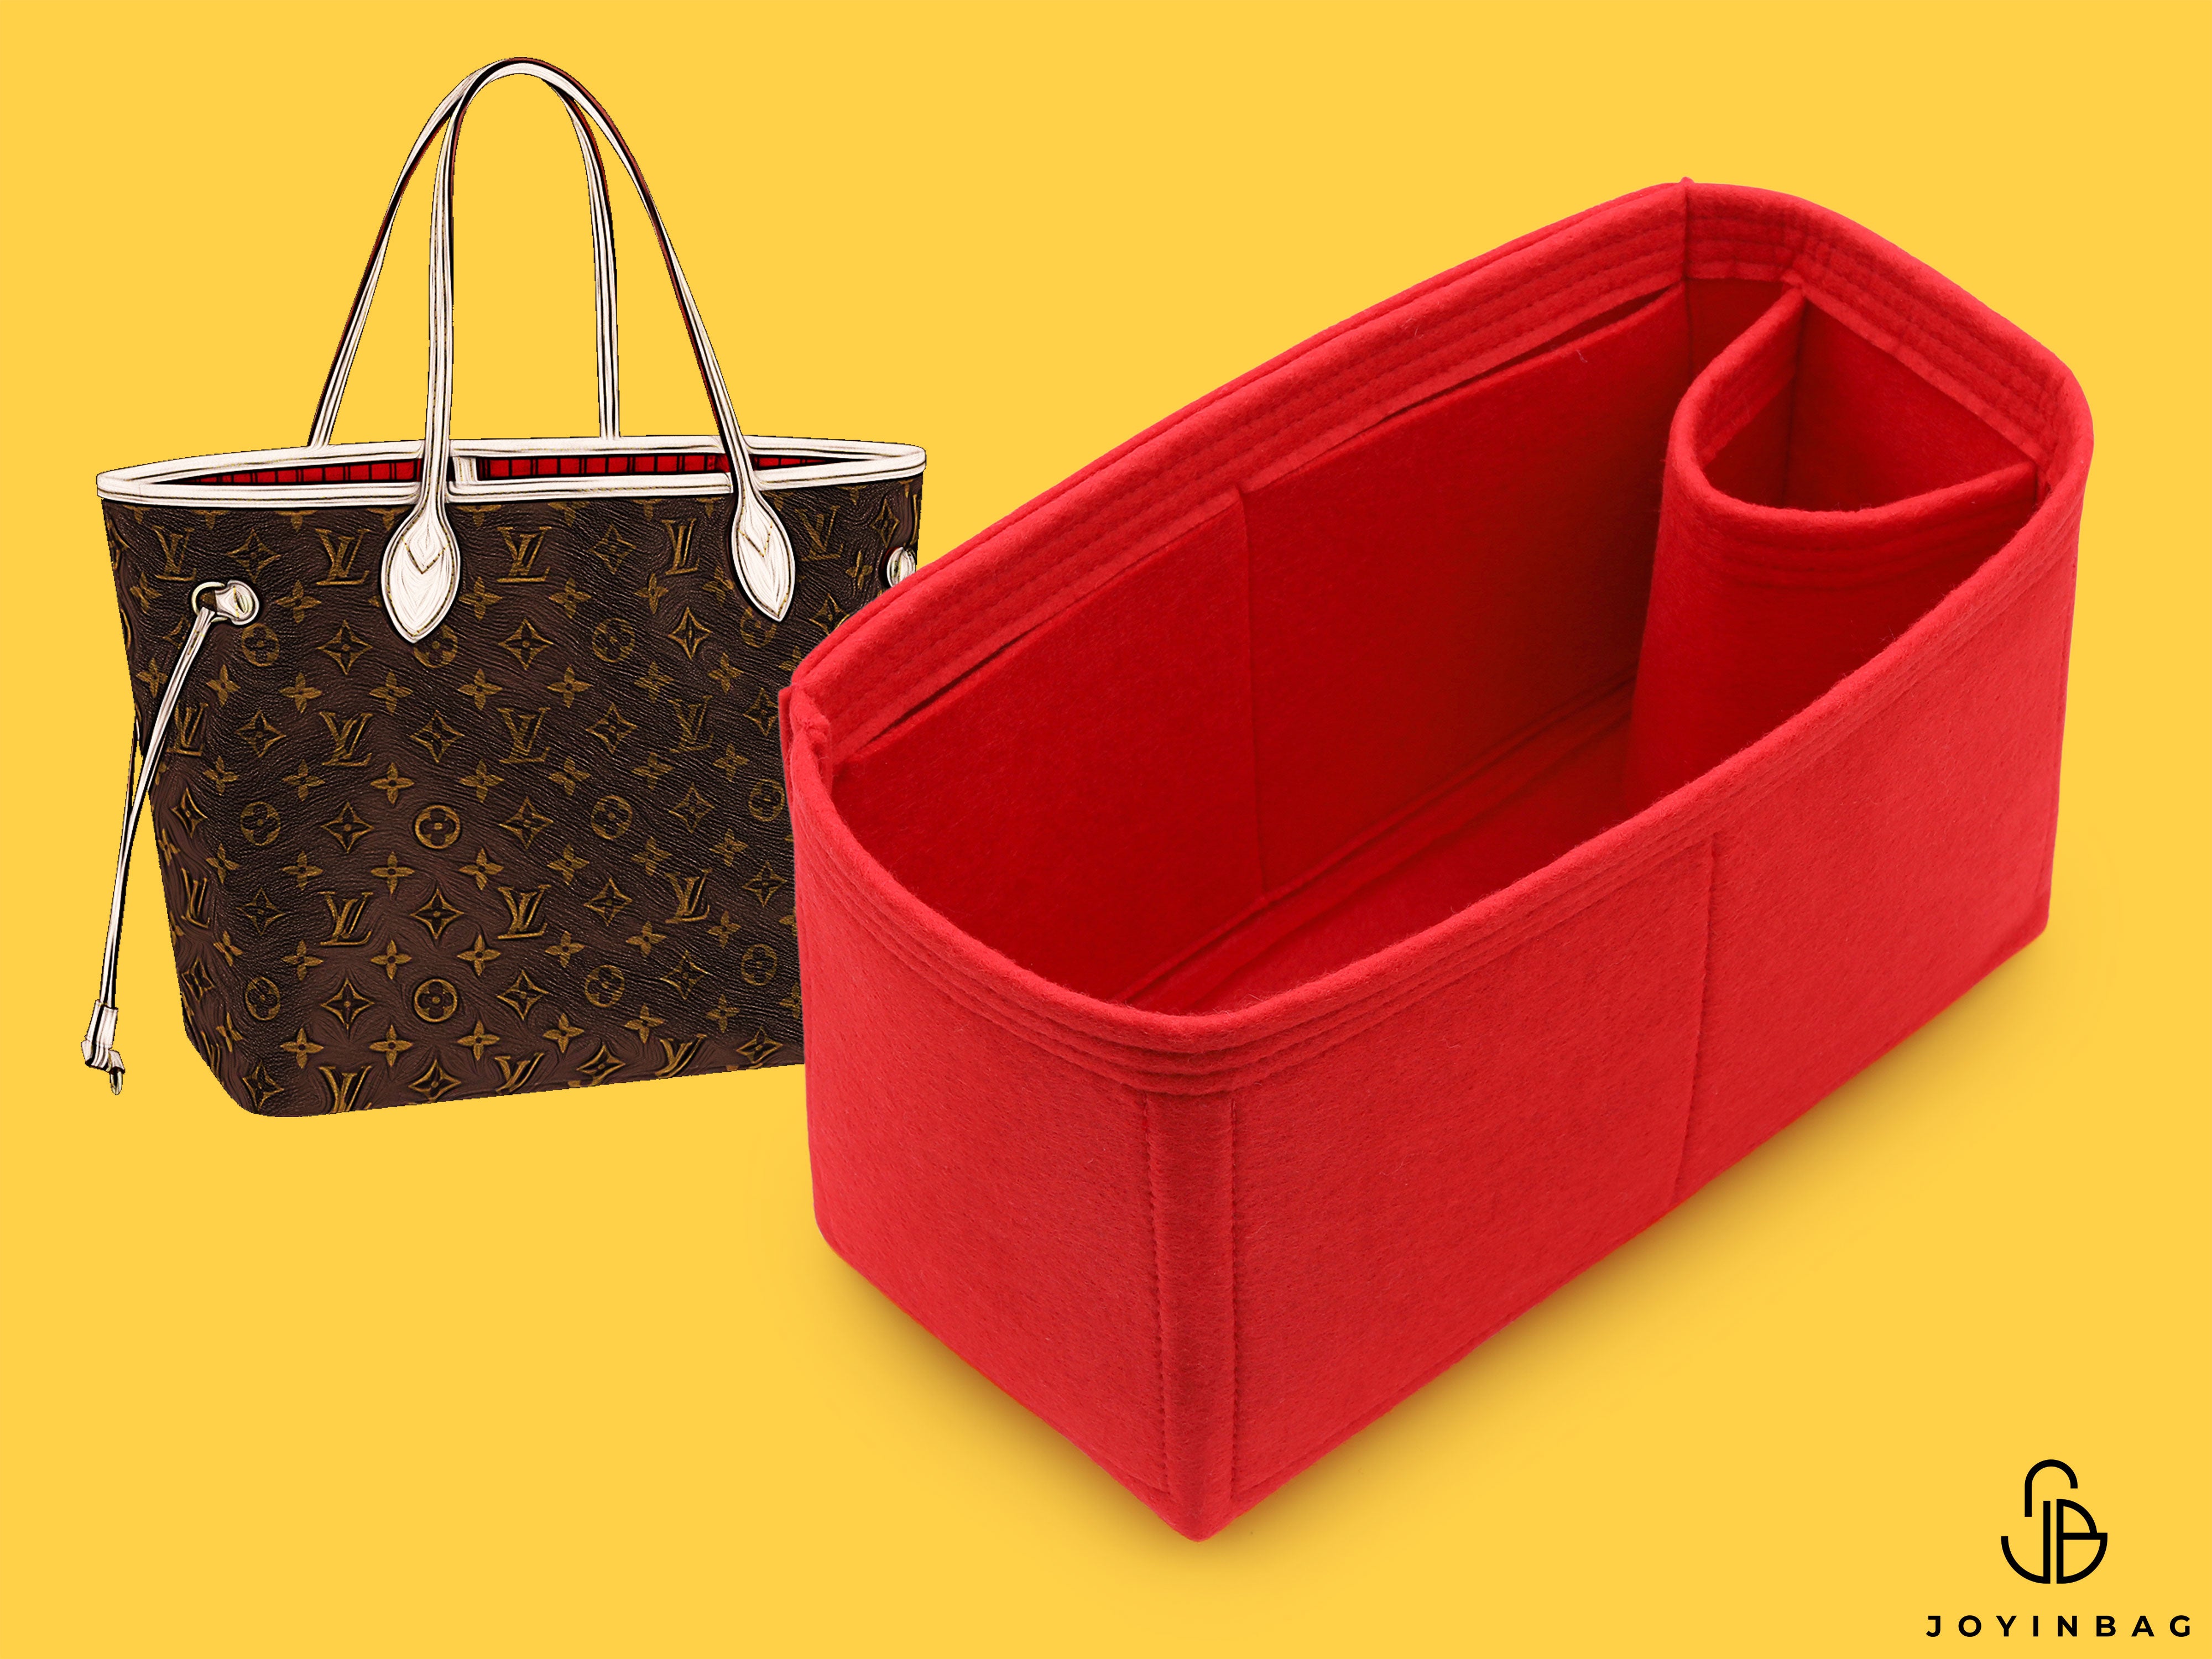 Bag and Purse Organizer with Regular Style for Louis Vuitton Neverfull